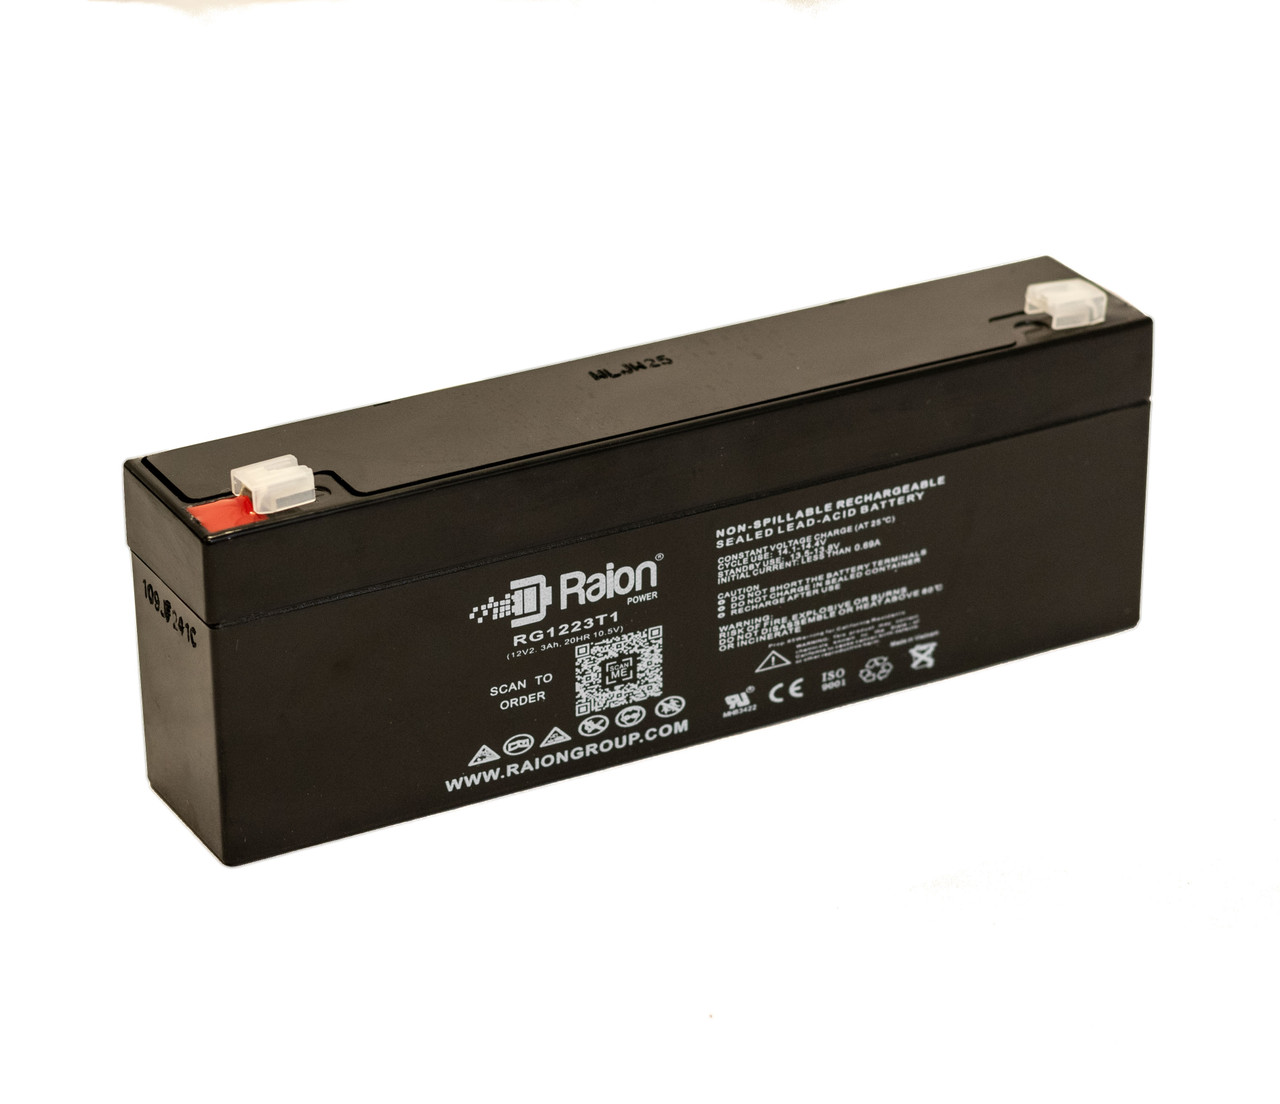 Raion Power RG1223T1 Replacement Battery for Air Shields Medical N-10 Warm Weight Infant Scale